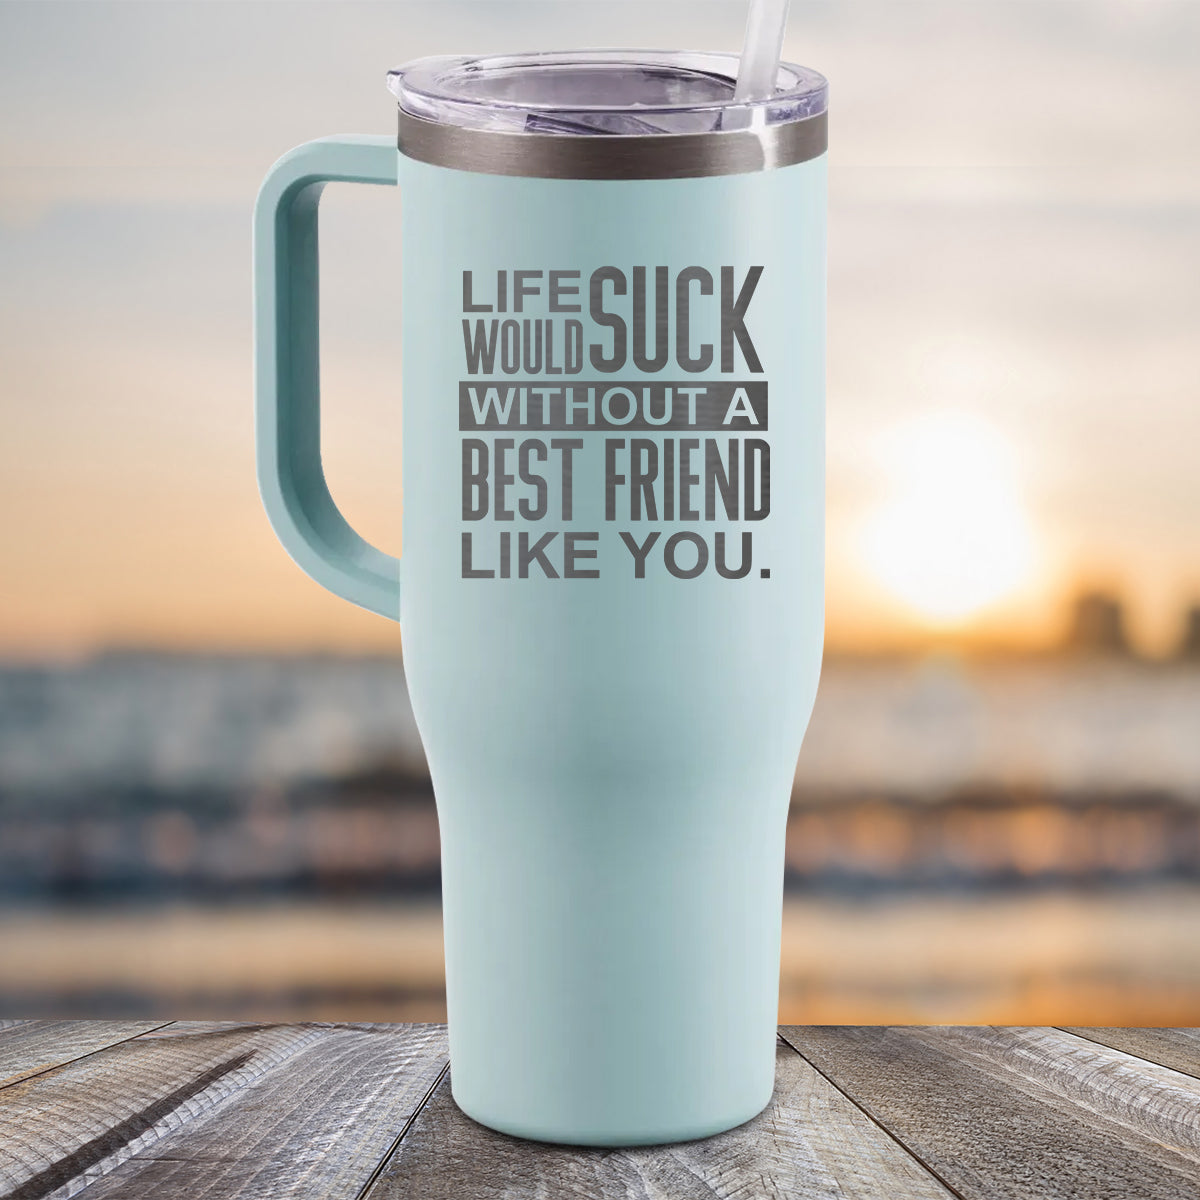 NEW 40oz Life Would Suck Without A Bestfriend Like You Engraved Tumbler